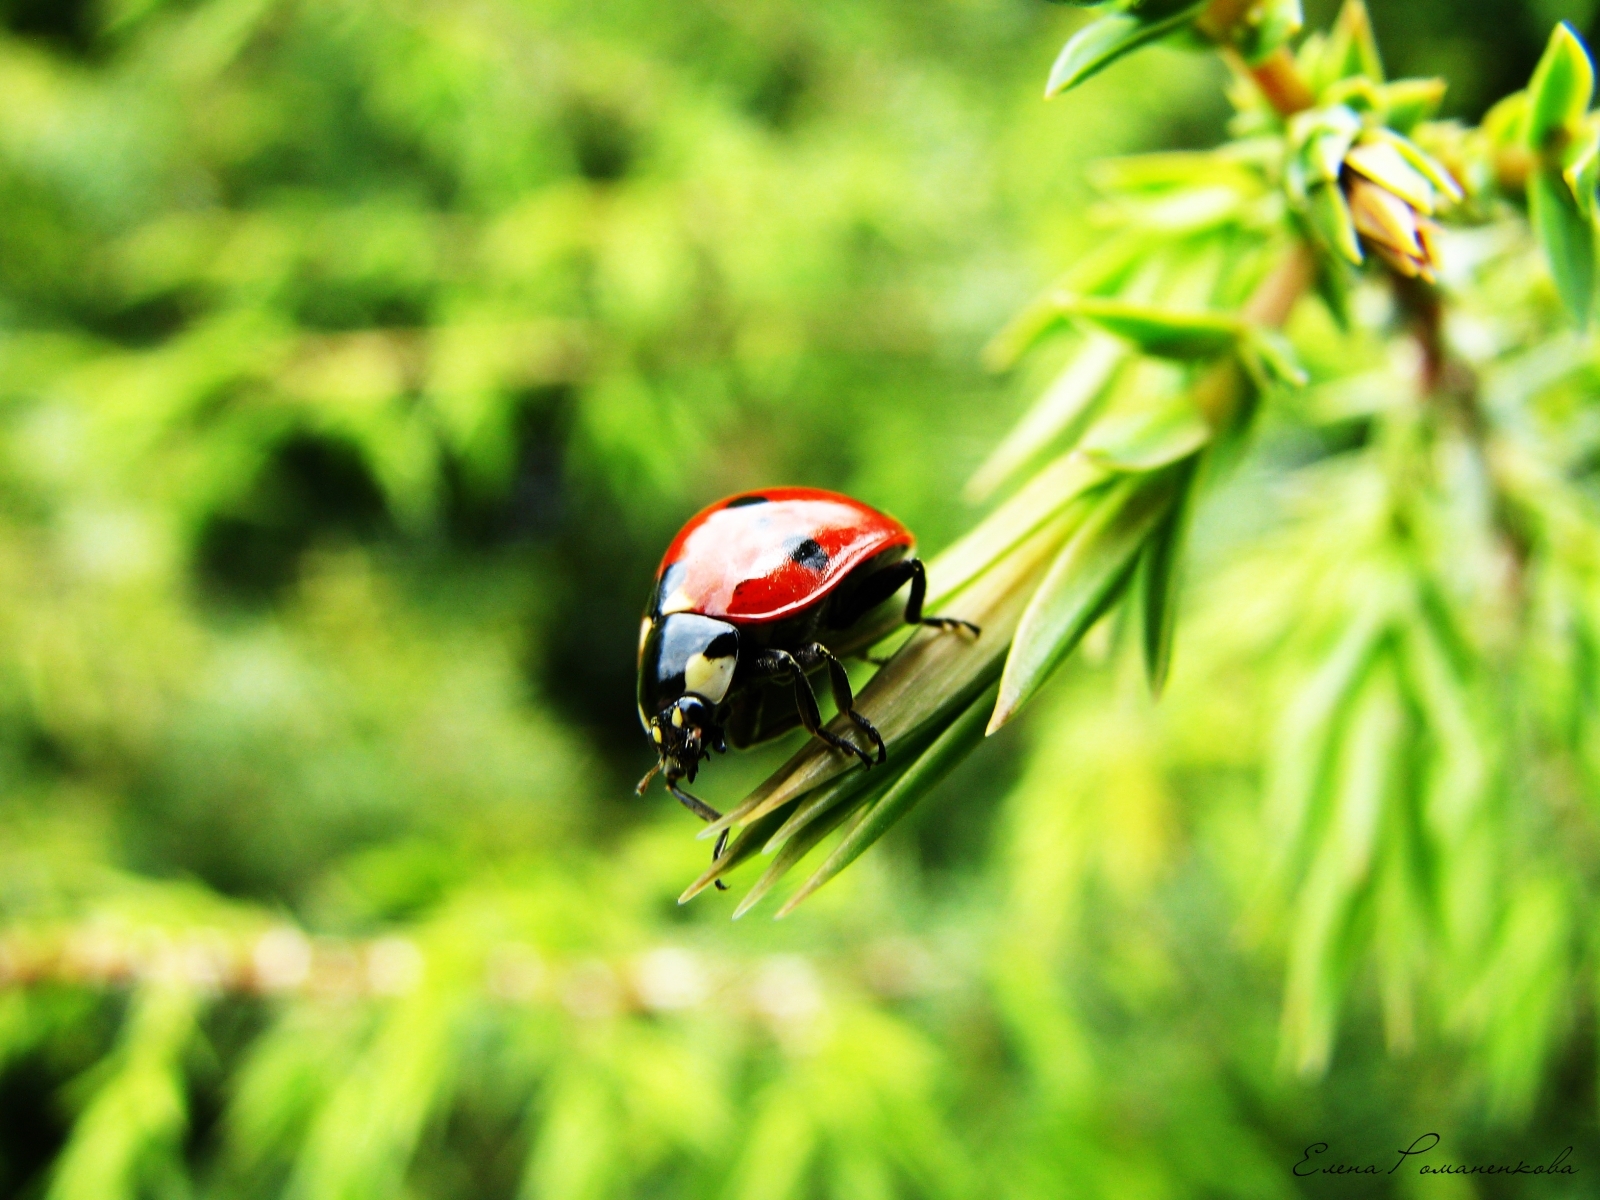 Wallpaper Full HD nature, insects, ladybugs, green